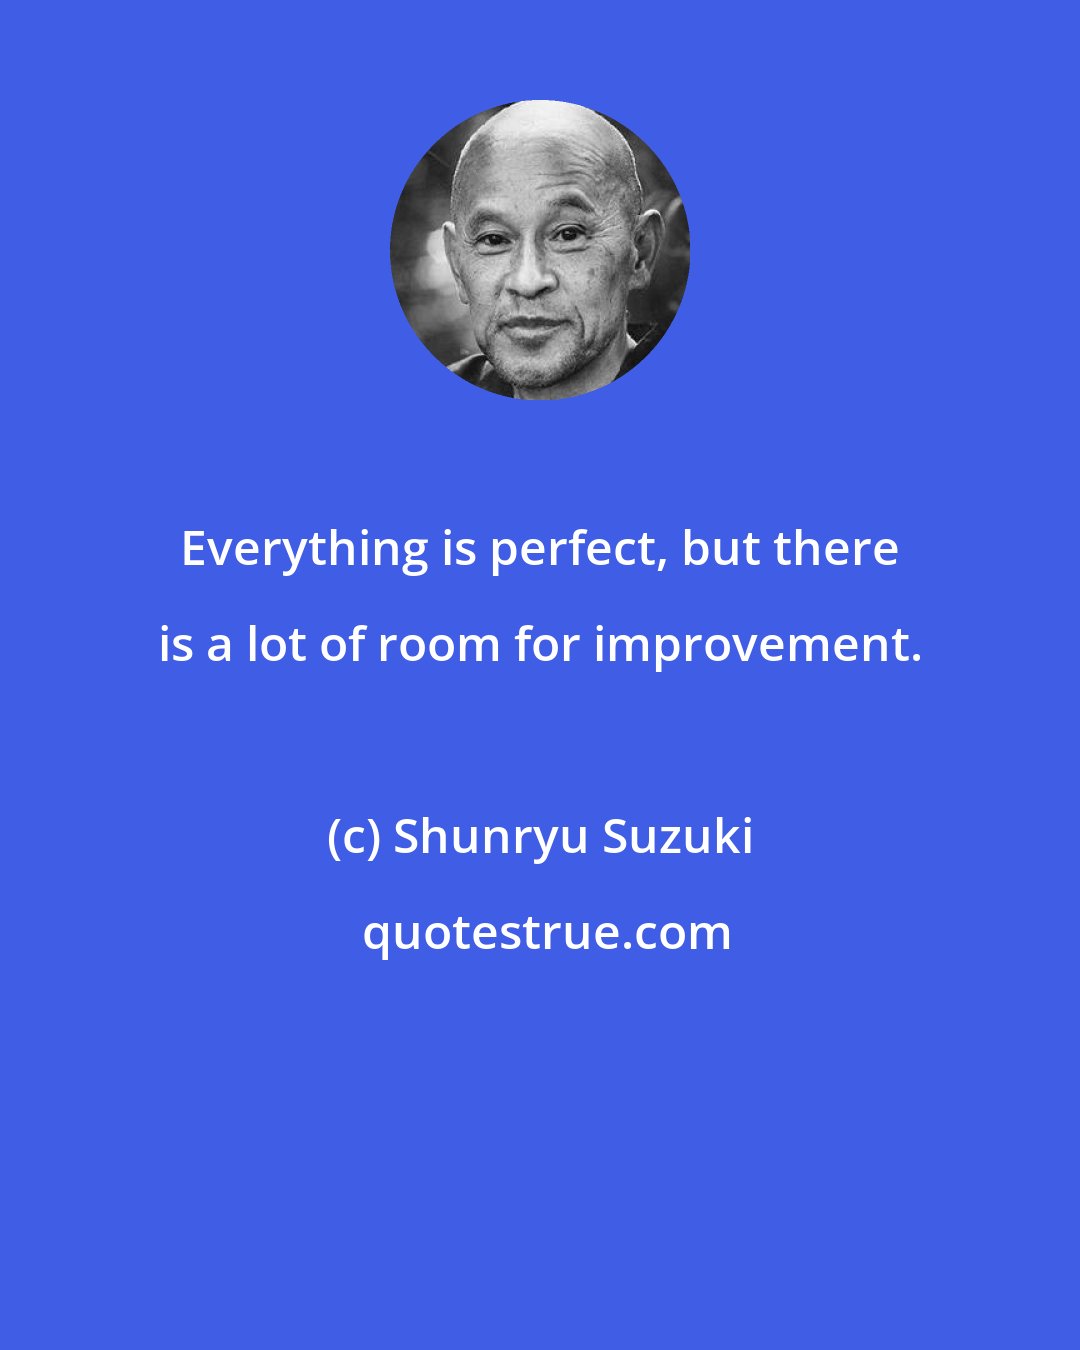 Shunryu Suzuki: Everything is perfect, but there is a lot of room for improvement.